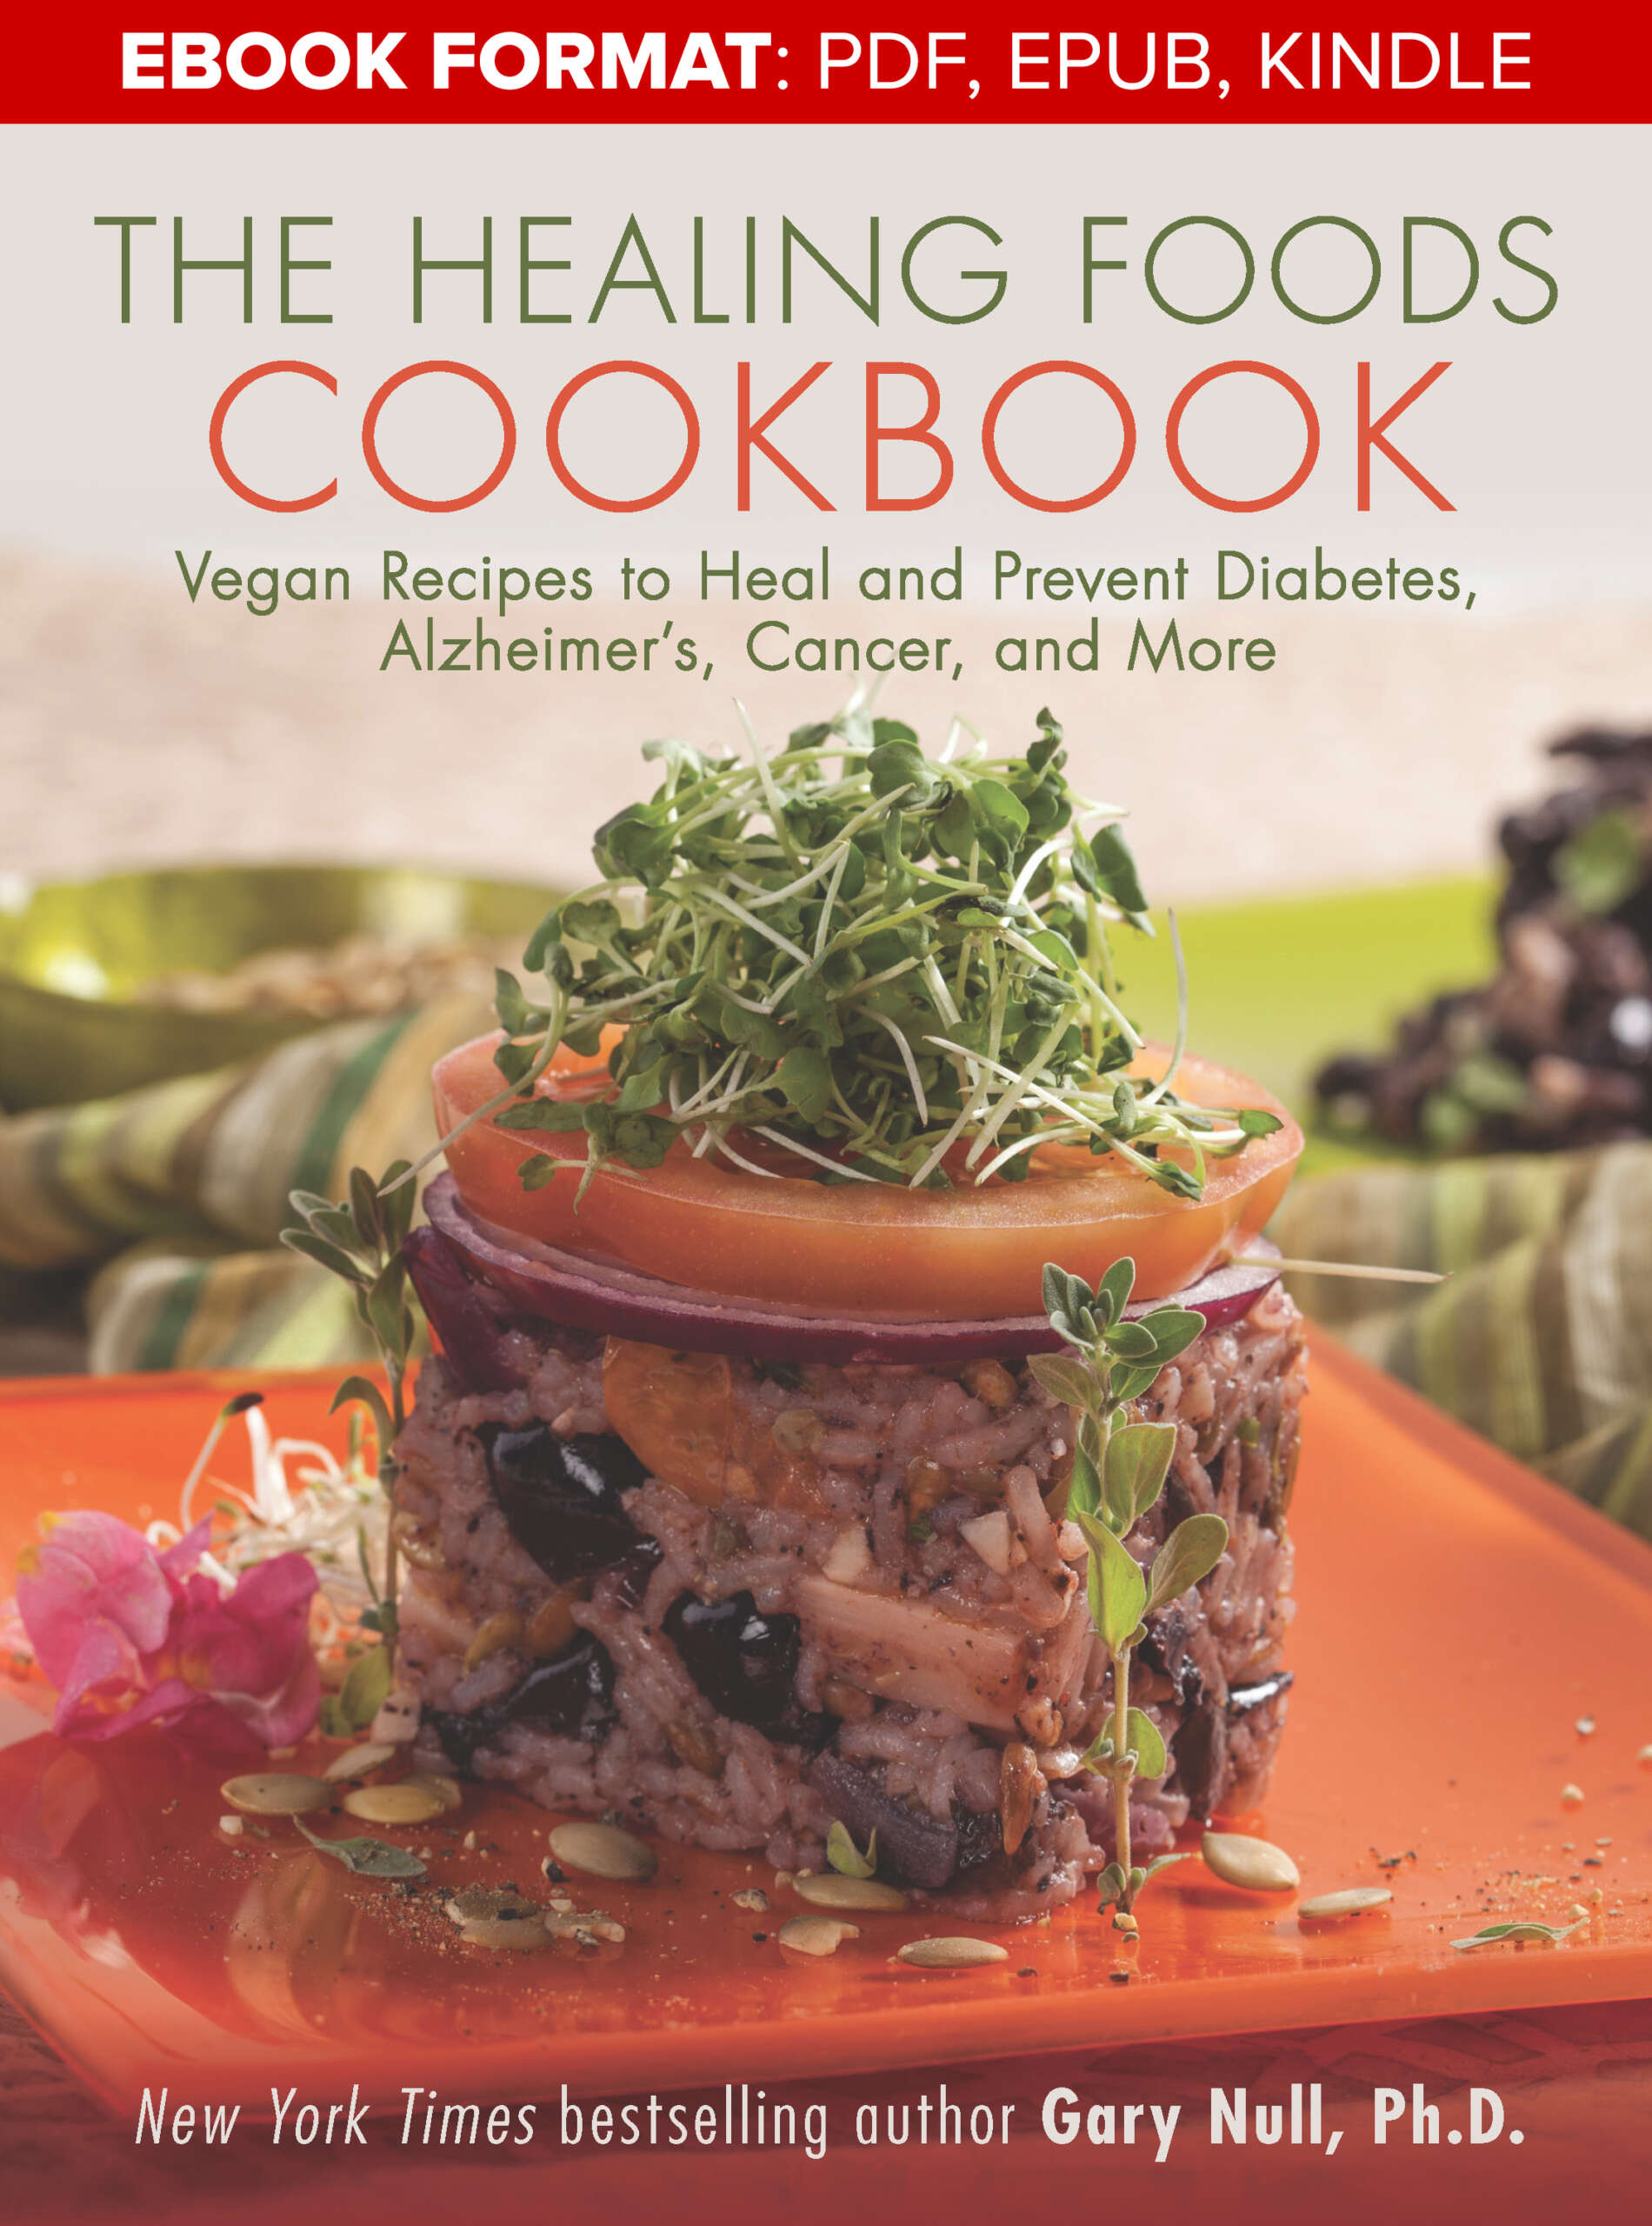 The Healing Foods Cookbook: Vegan Recipes to Heal and Prevent Diabetes